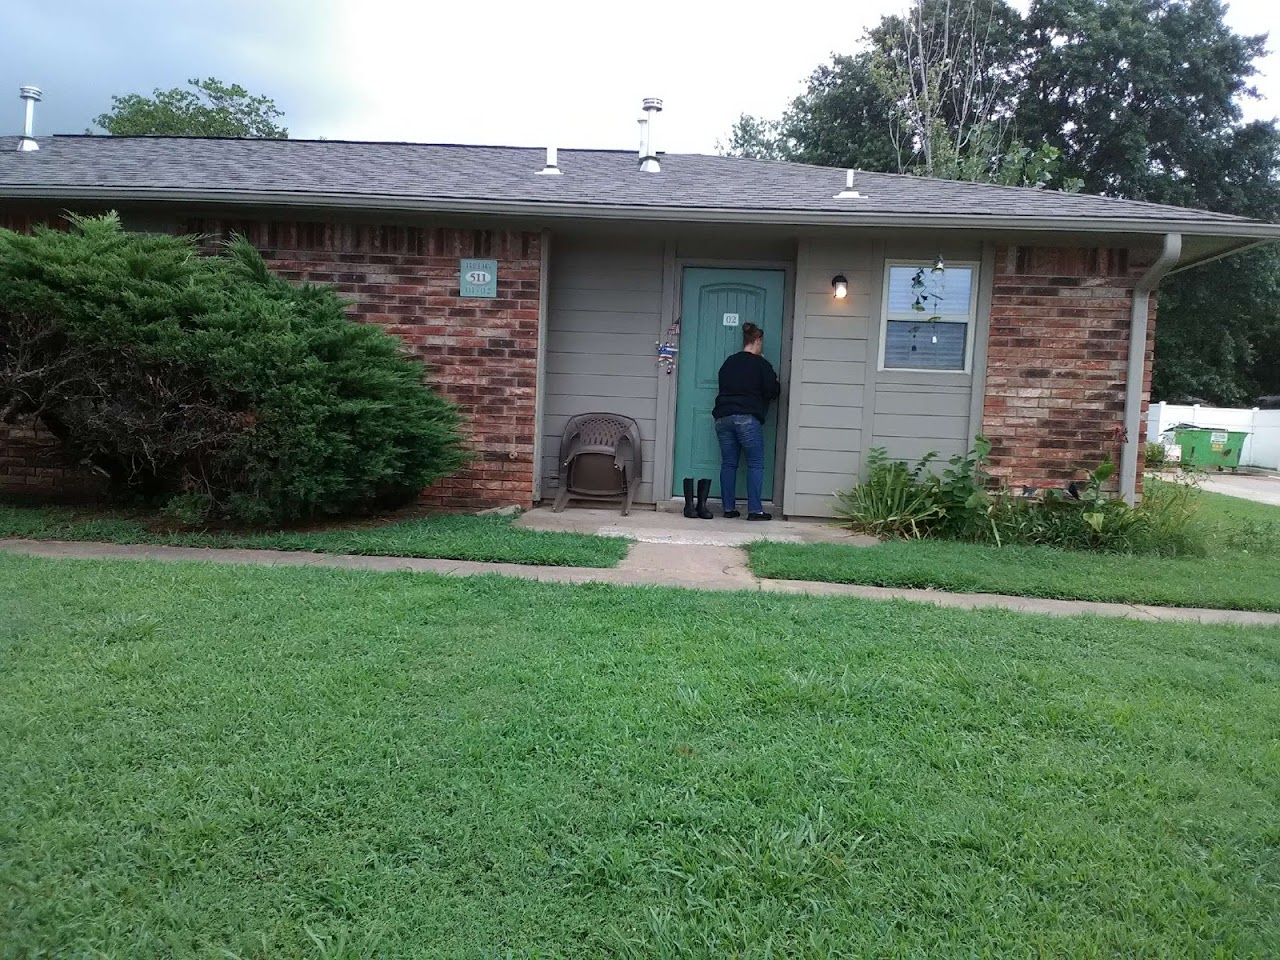 Photo of GARDEN WALK OF GROVE. Affordable housing located at 400 MILL CREEK DRIVE GROVE, OK 74344